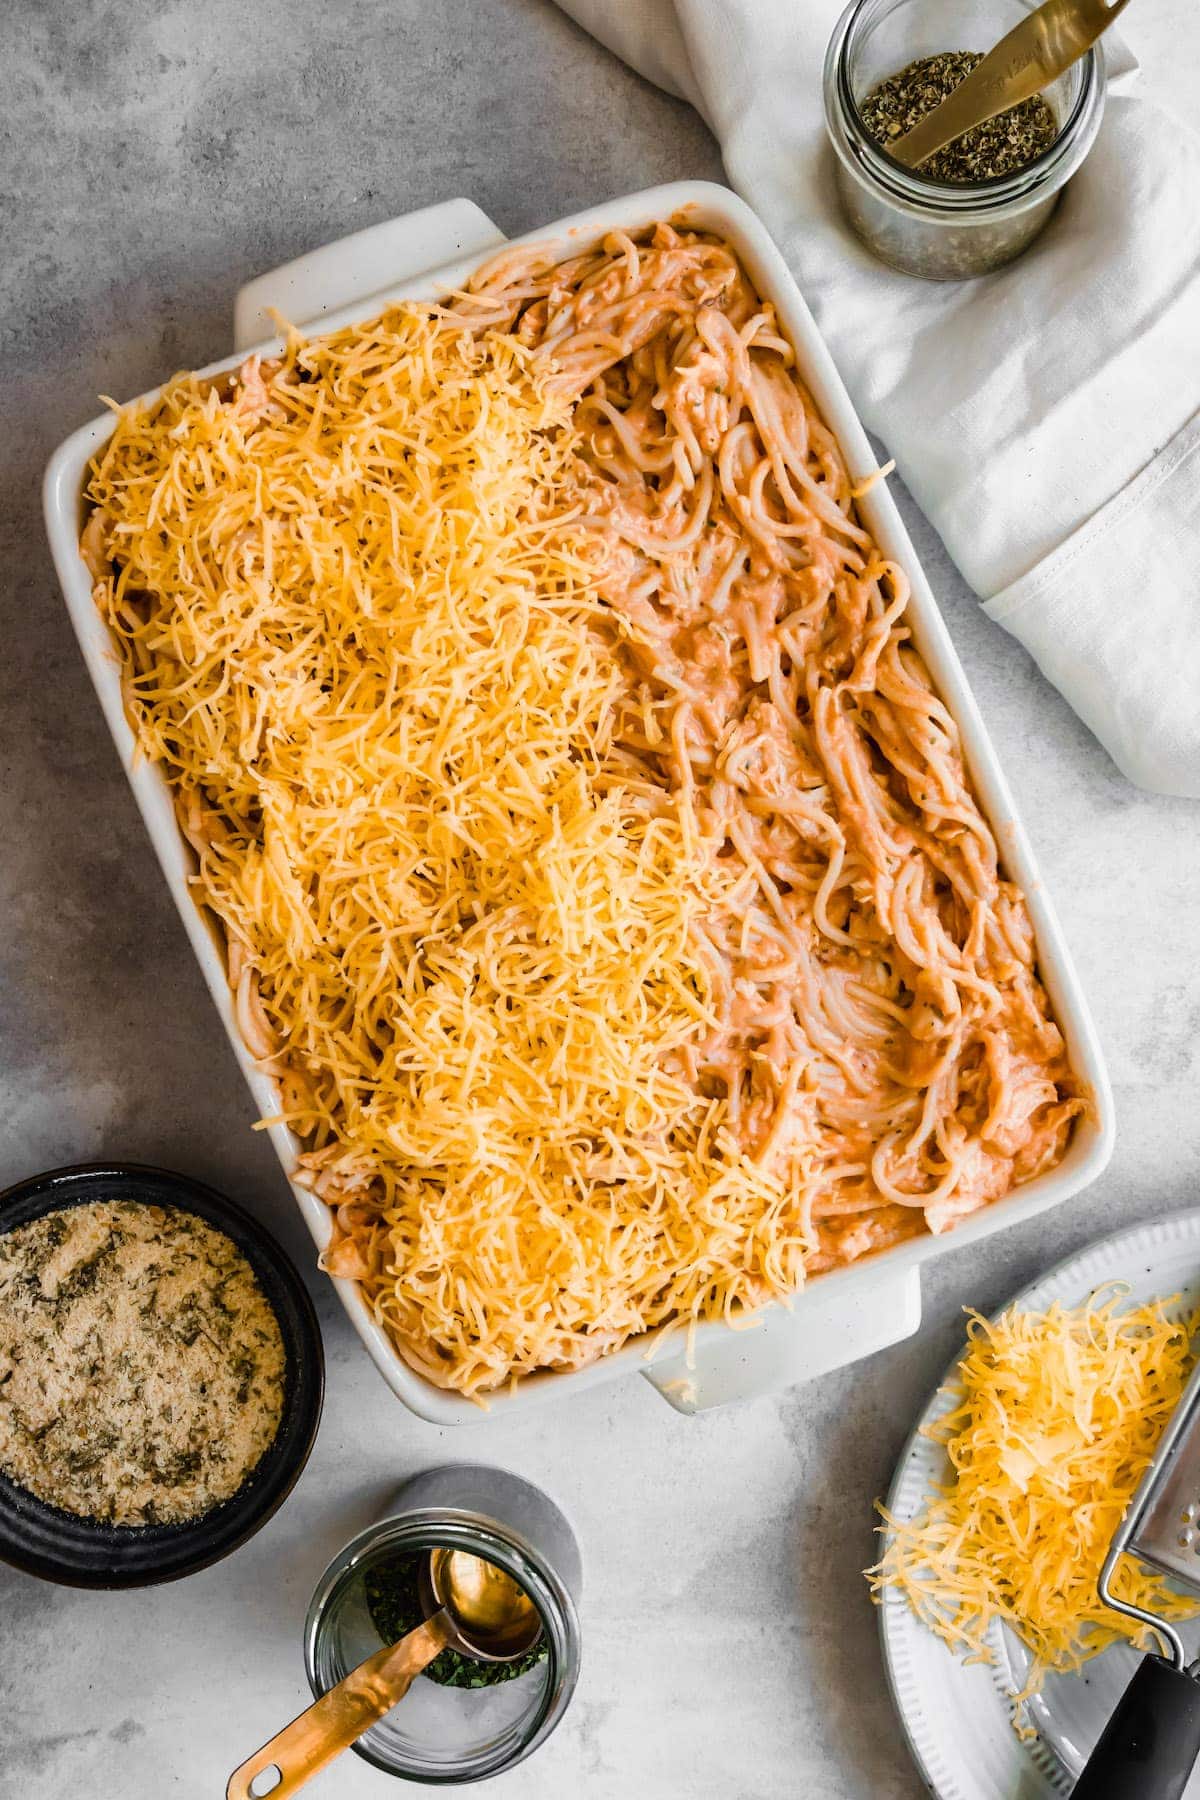 Spaghetti casserole with cheddar cheese being spread on top.